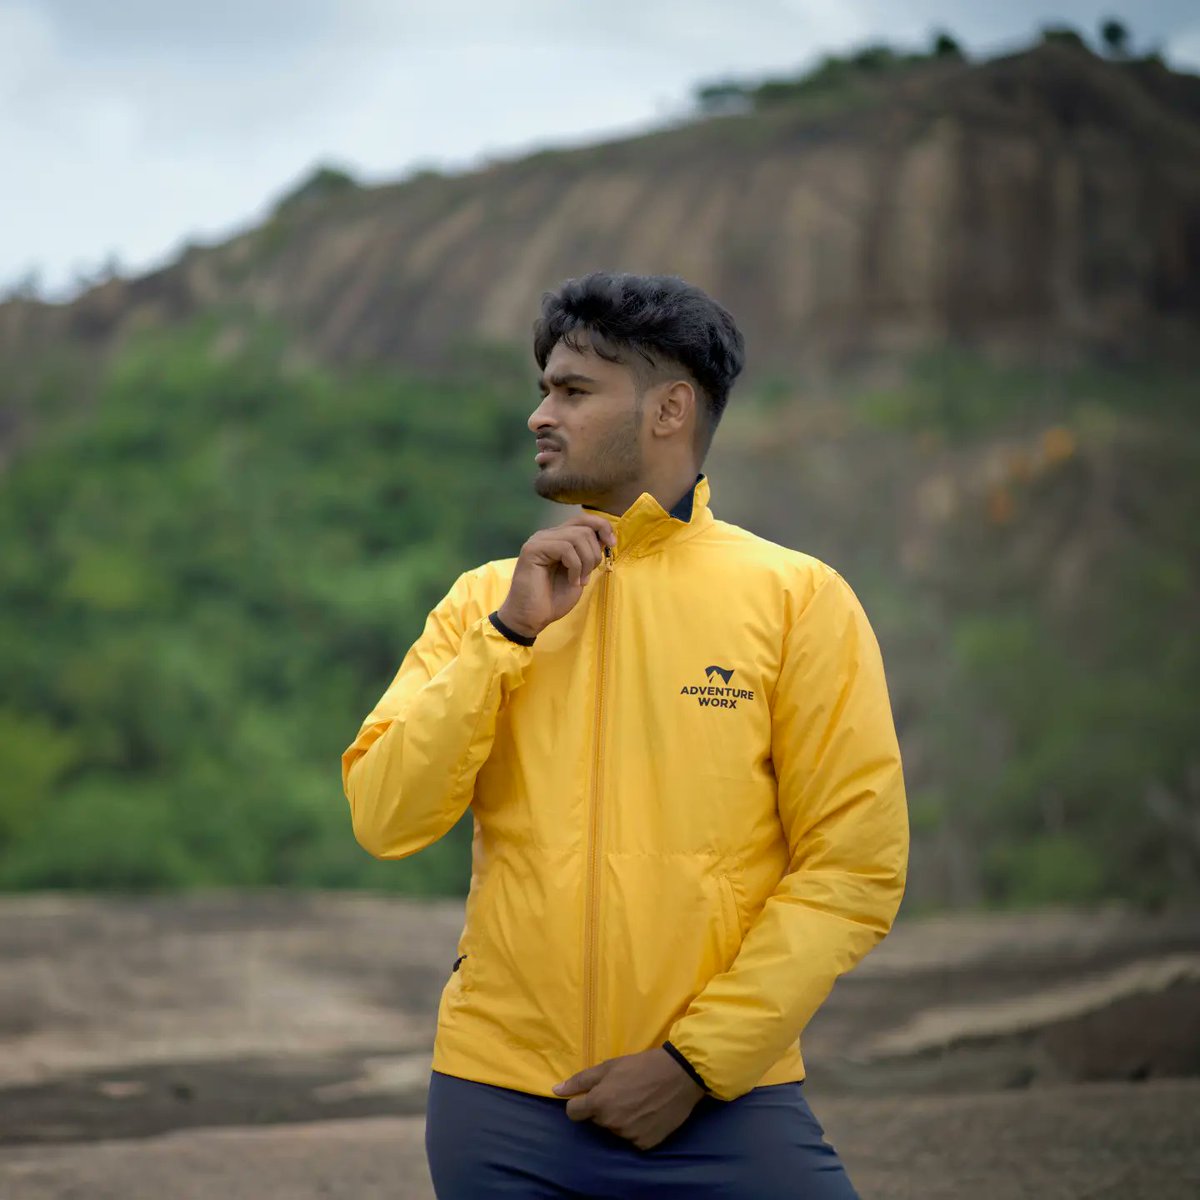 Stay light, warm, and visible with our Windcheater Jacket featuring water repellency, fleece-lined neck, and reflective detailing⚡️
#goexplore #windcheaters #mountain #windy #jackets #reflectivedetailing #waterrepellent #windcheaterjackets #unisex #adventureworx #madeinindia🇮🇳